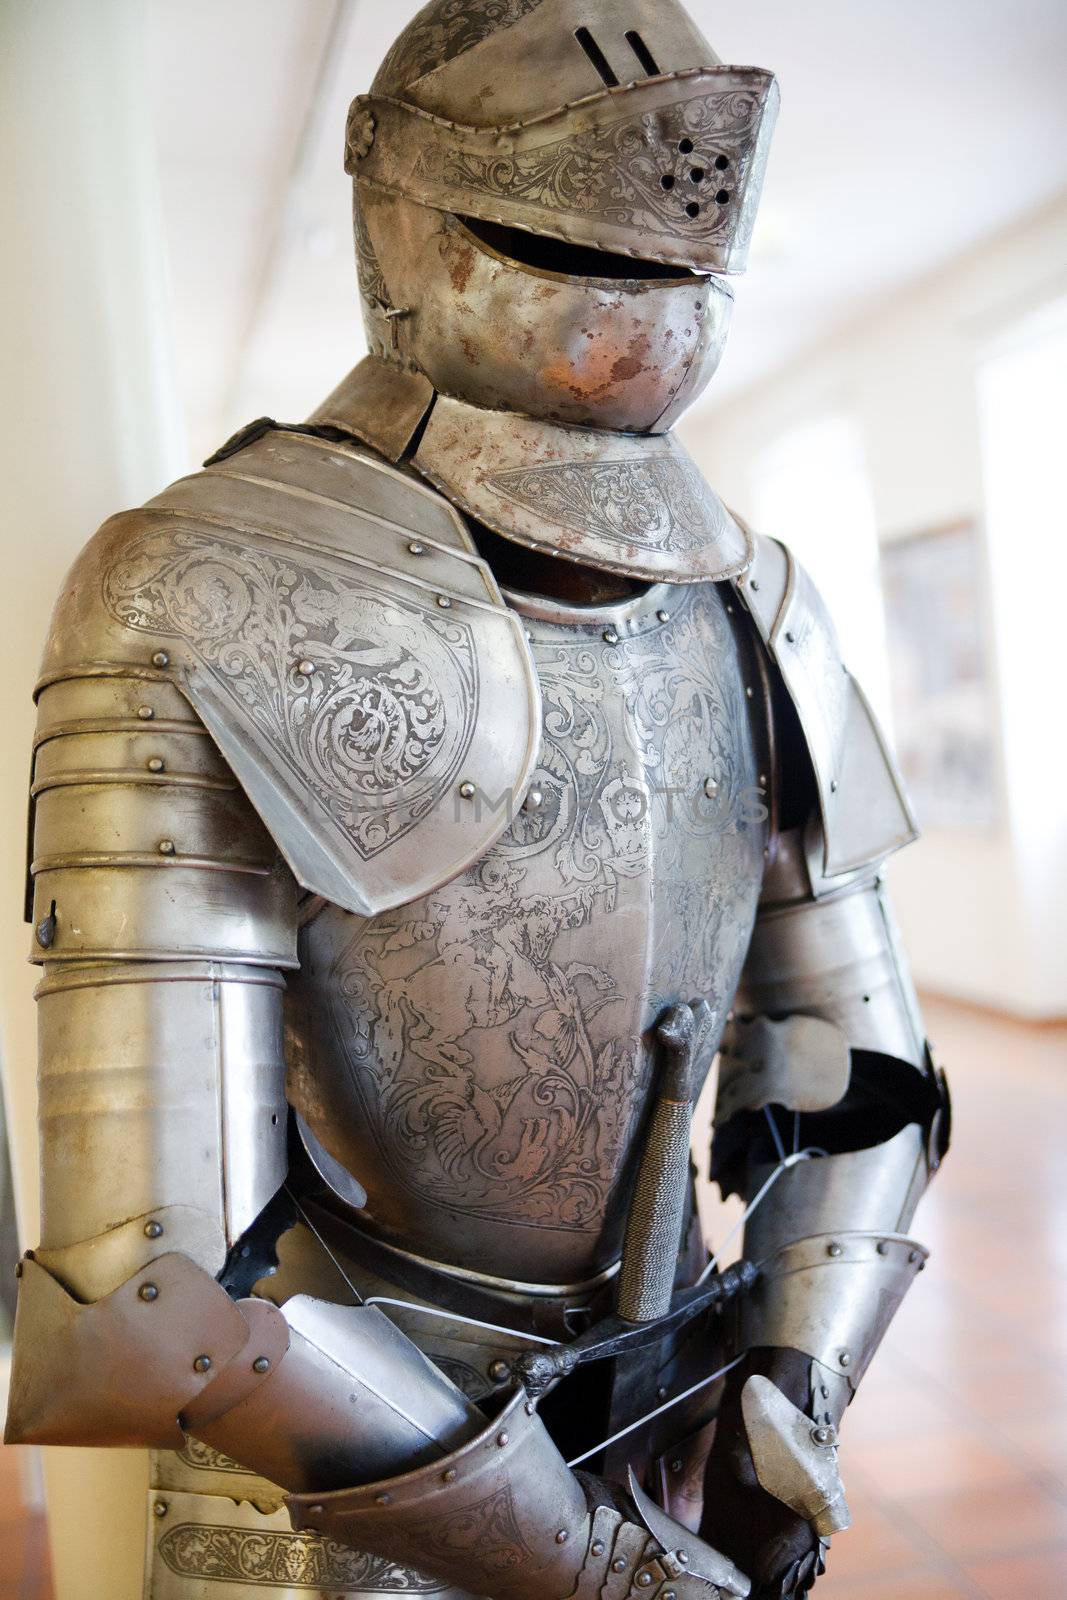 One natural old textured knight armor